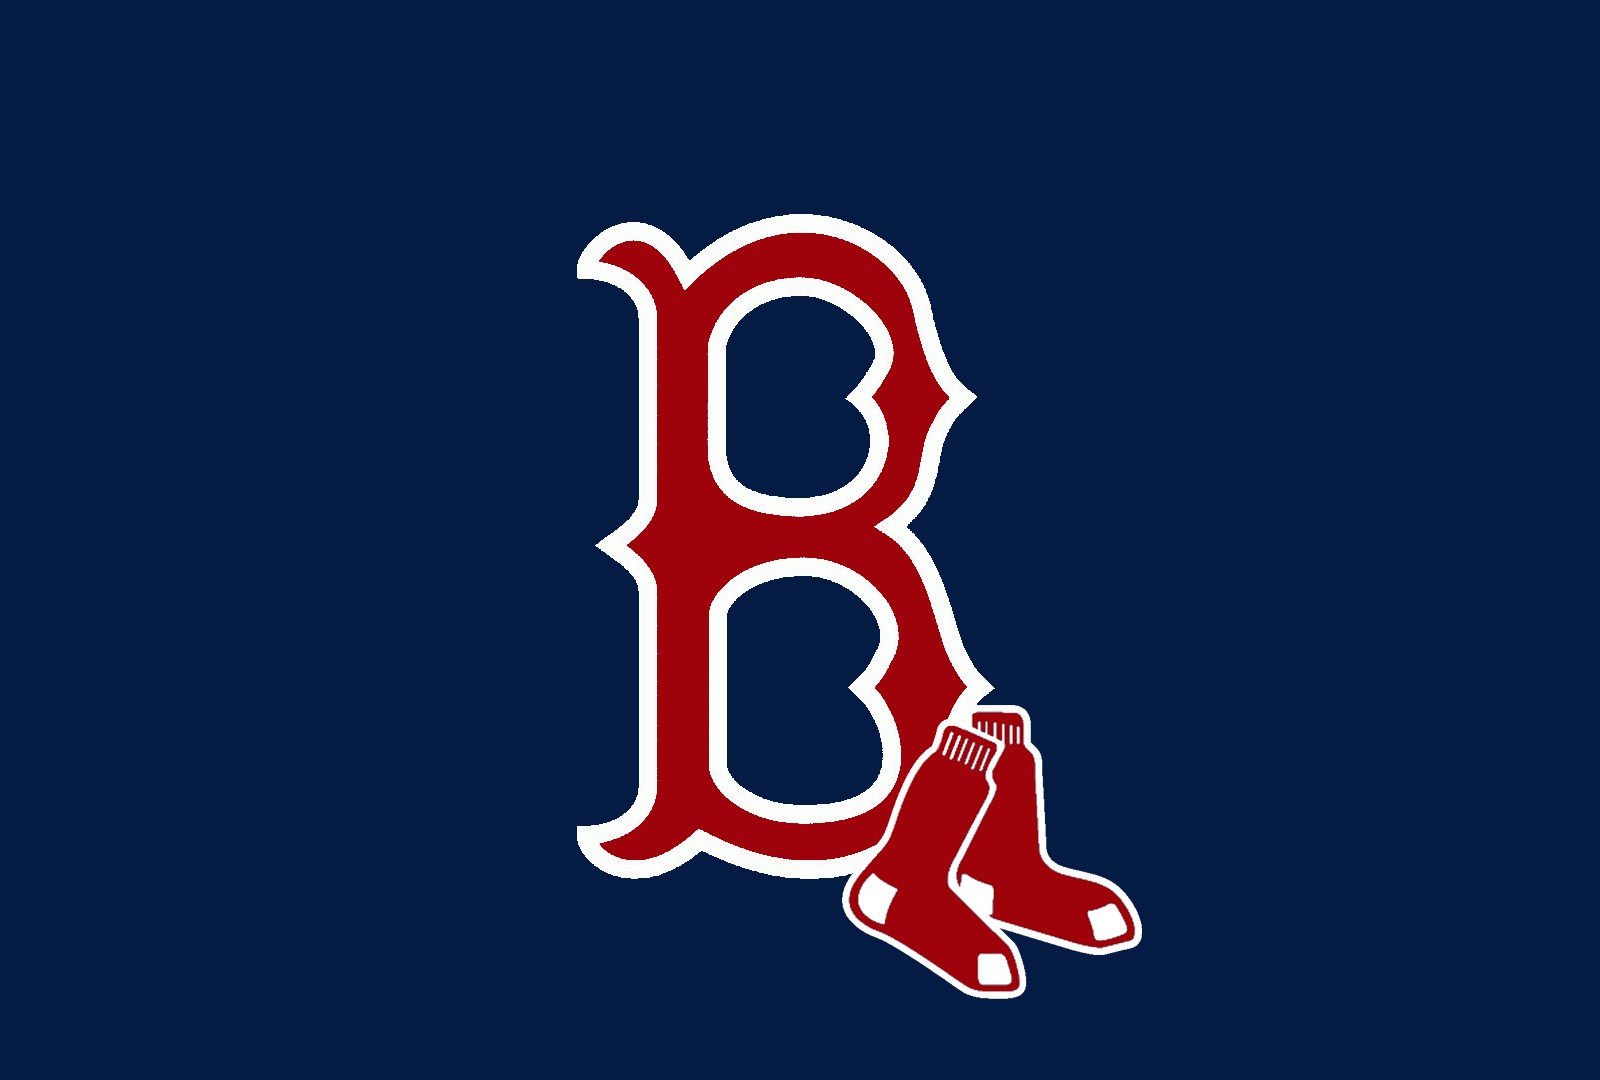 Red Sox Logo Wallpaper Hd images  pictures - NearPics